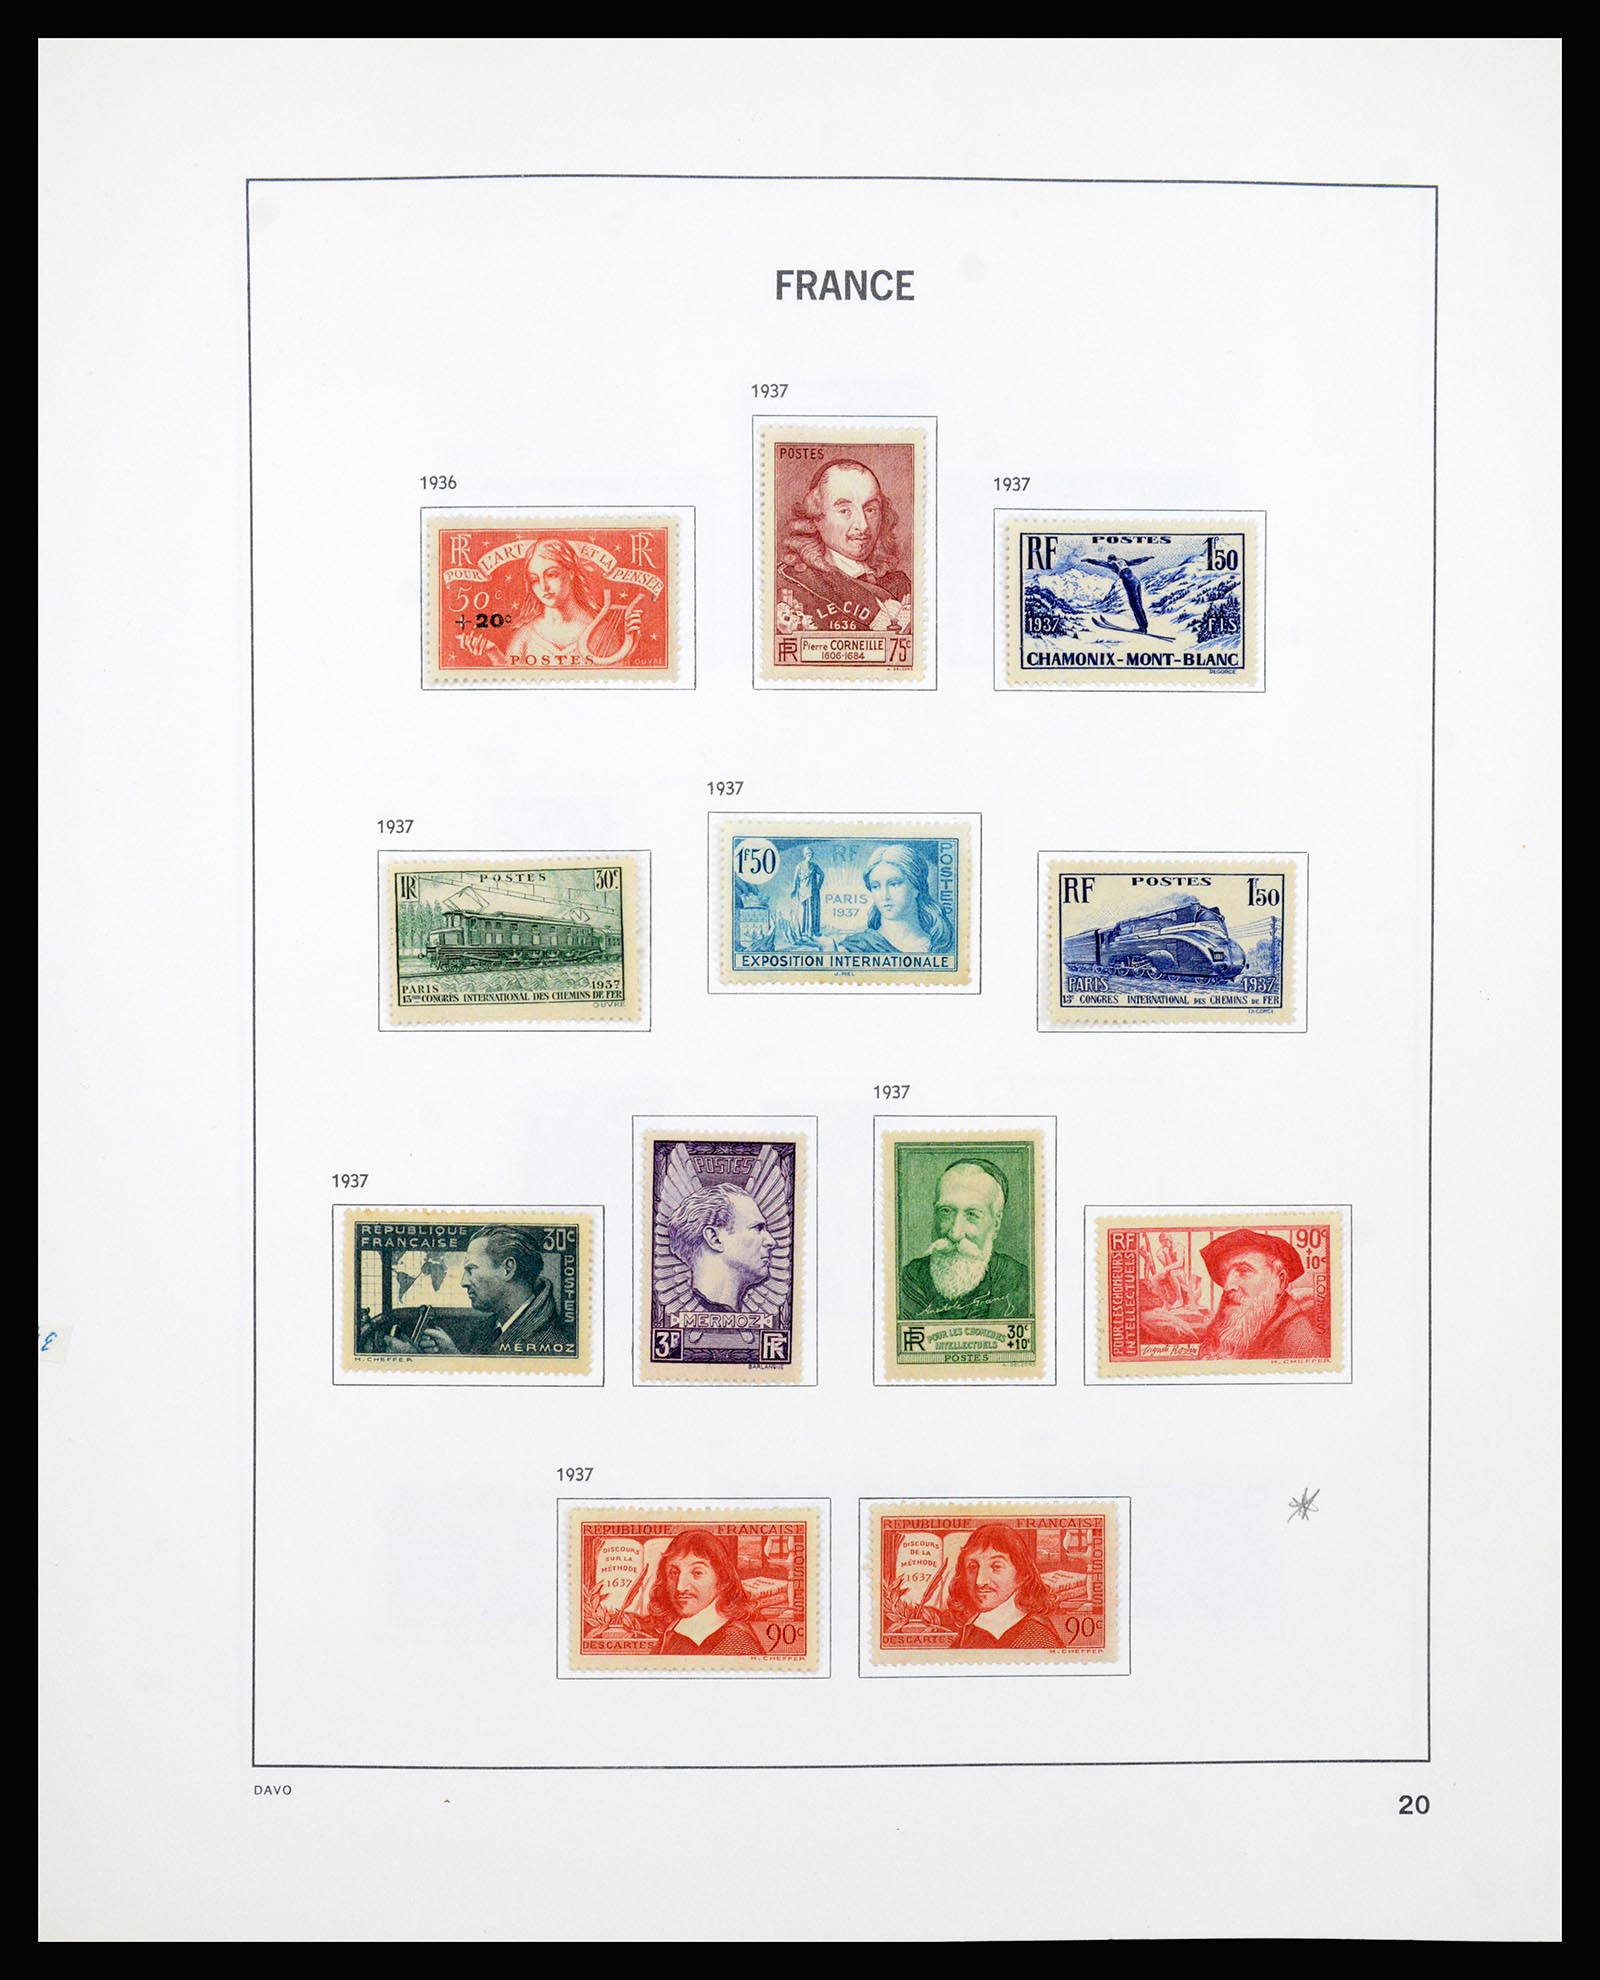 37236 020 - Stamp collection 37236 France 1849-1970.